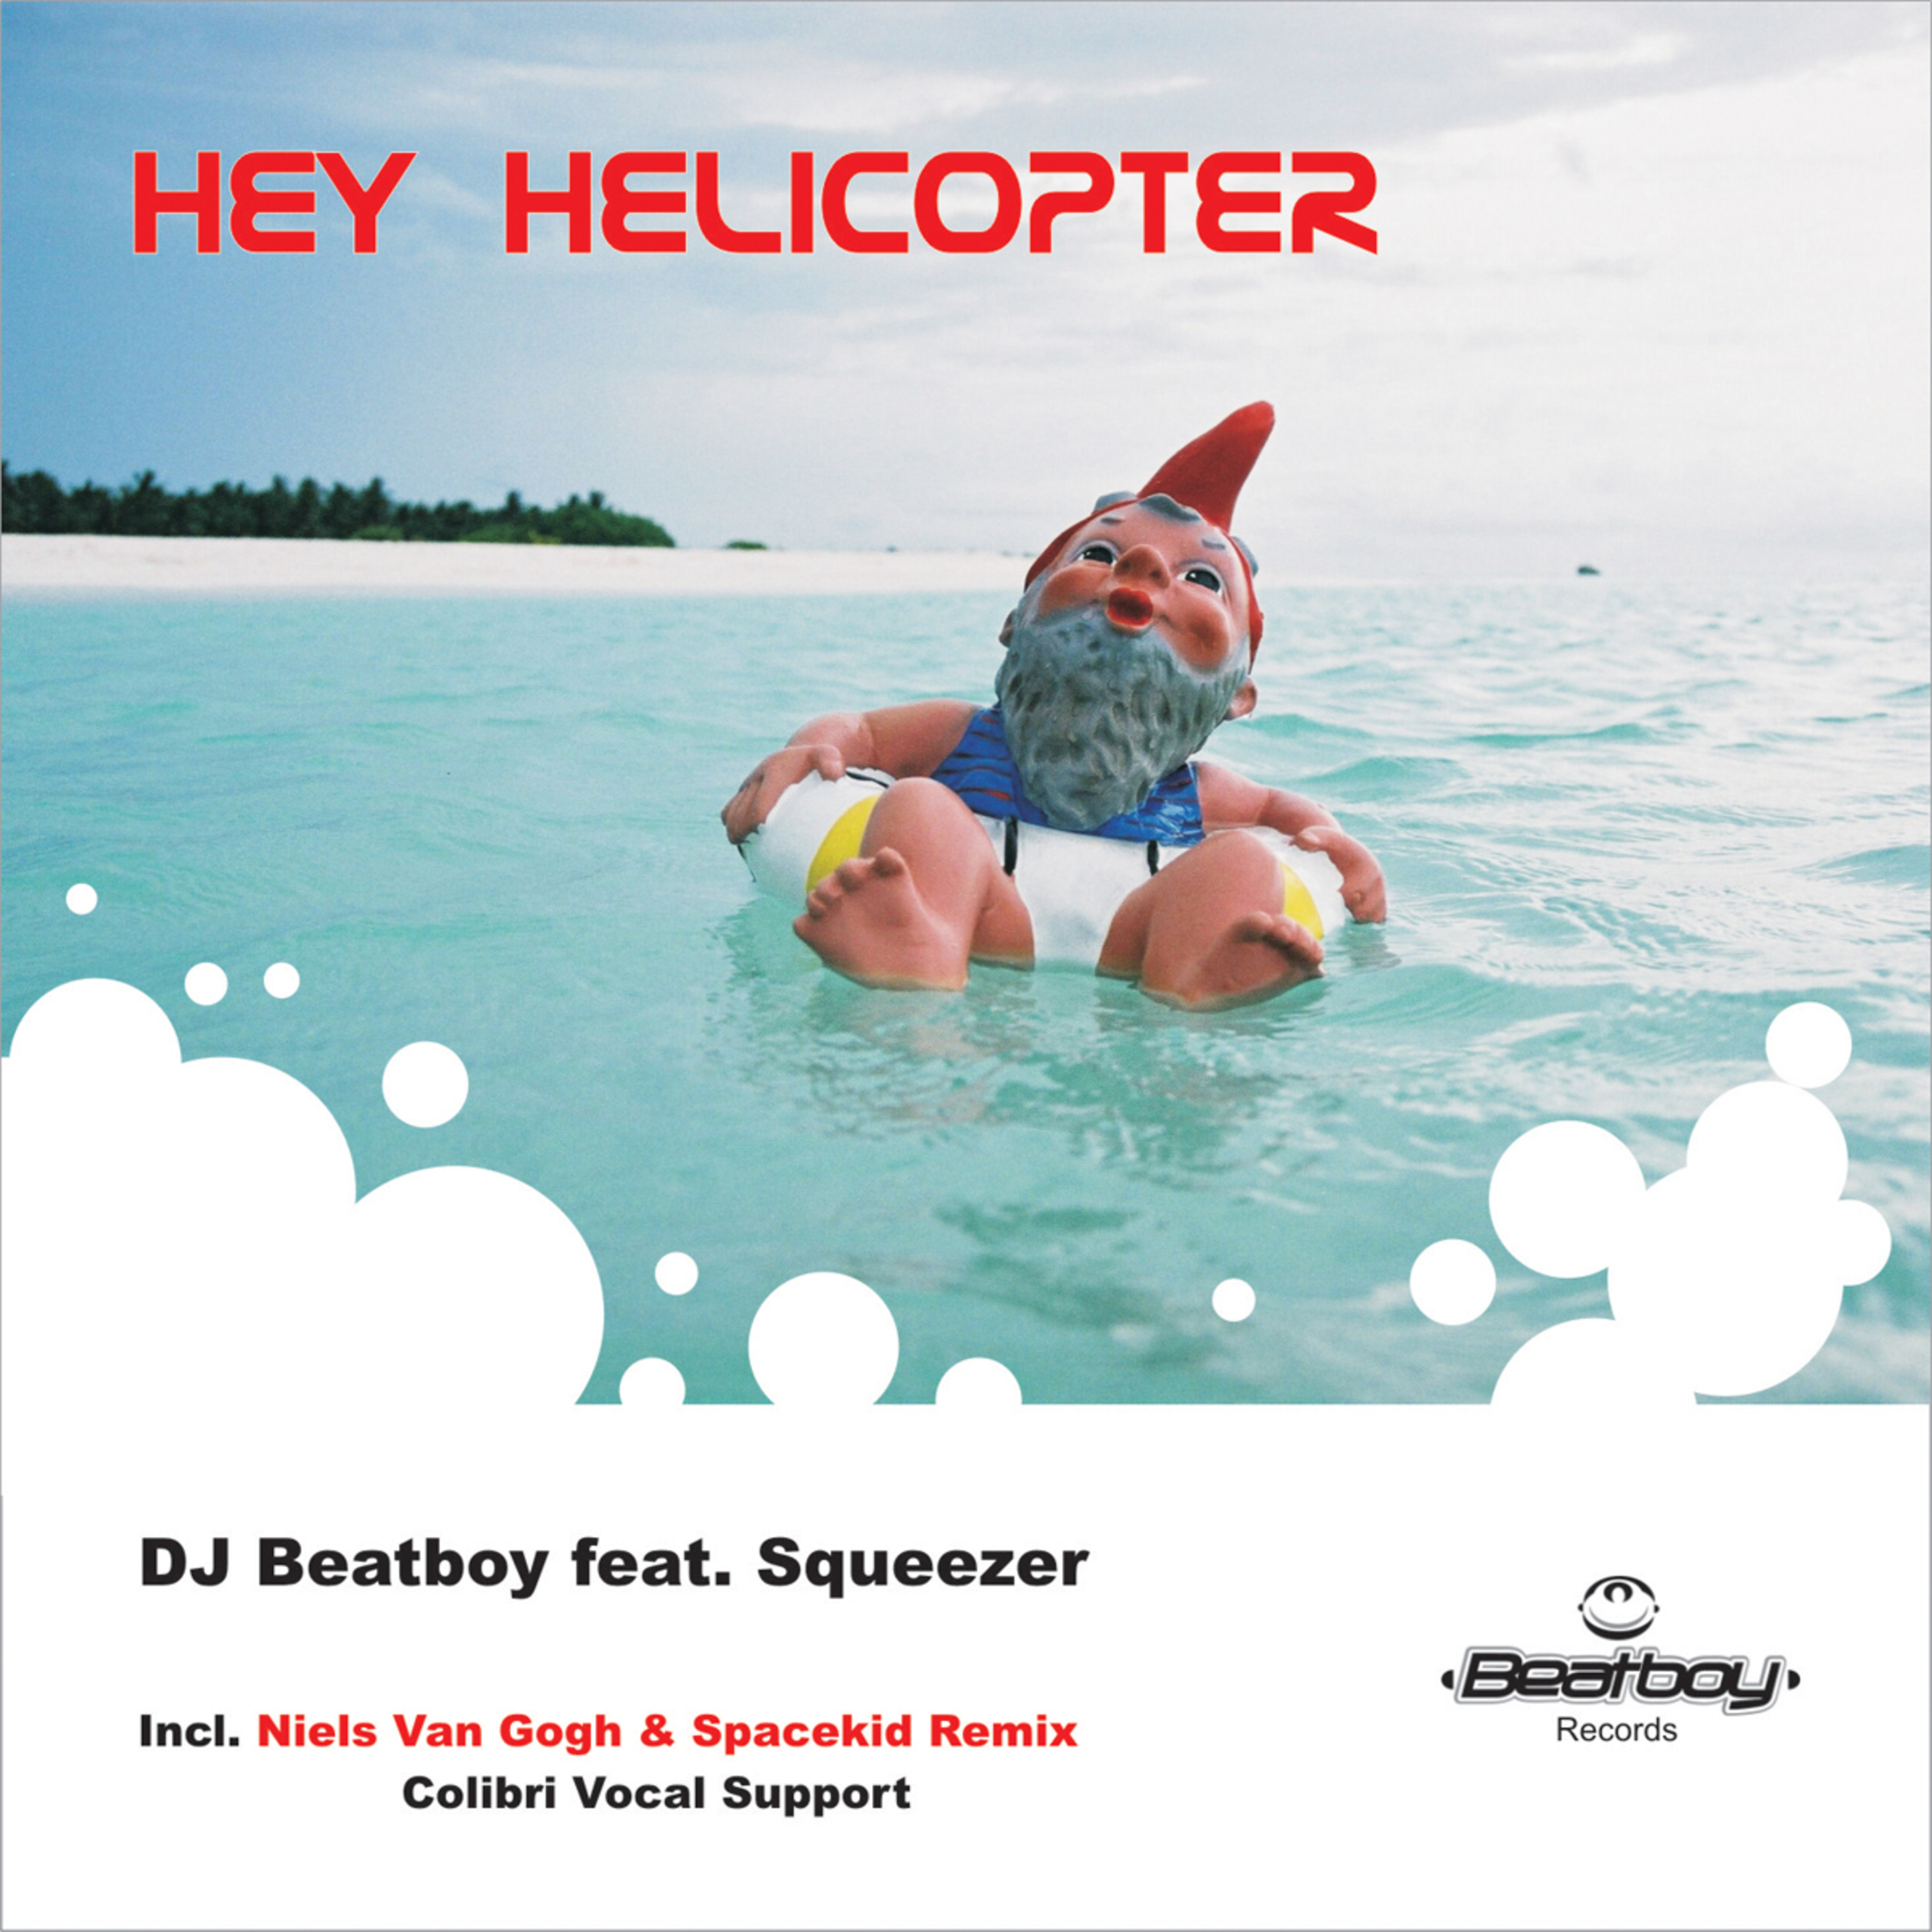 Hey Helicopter (Electro Remix)